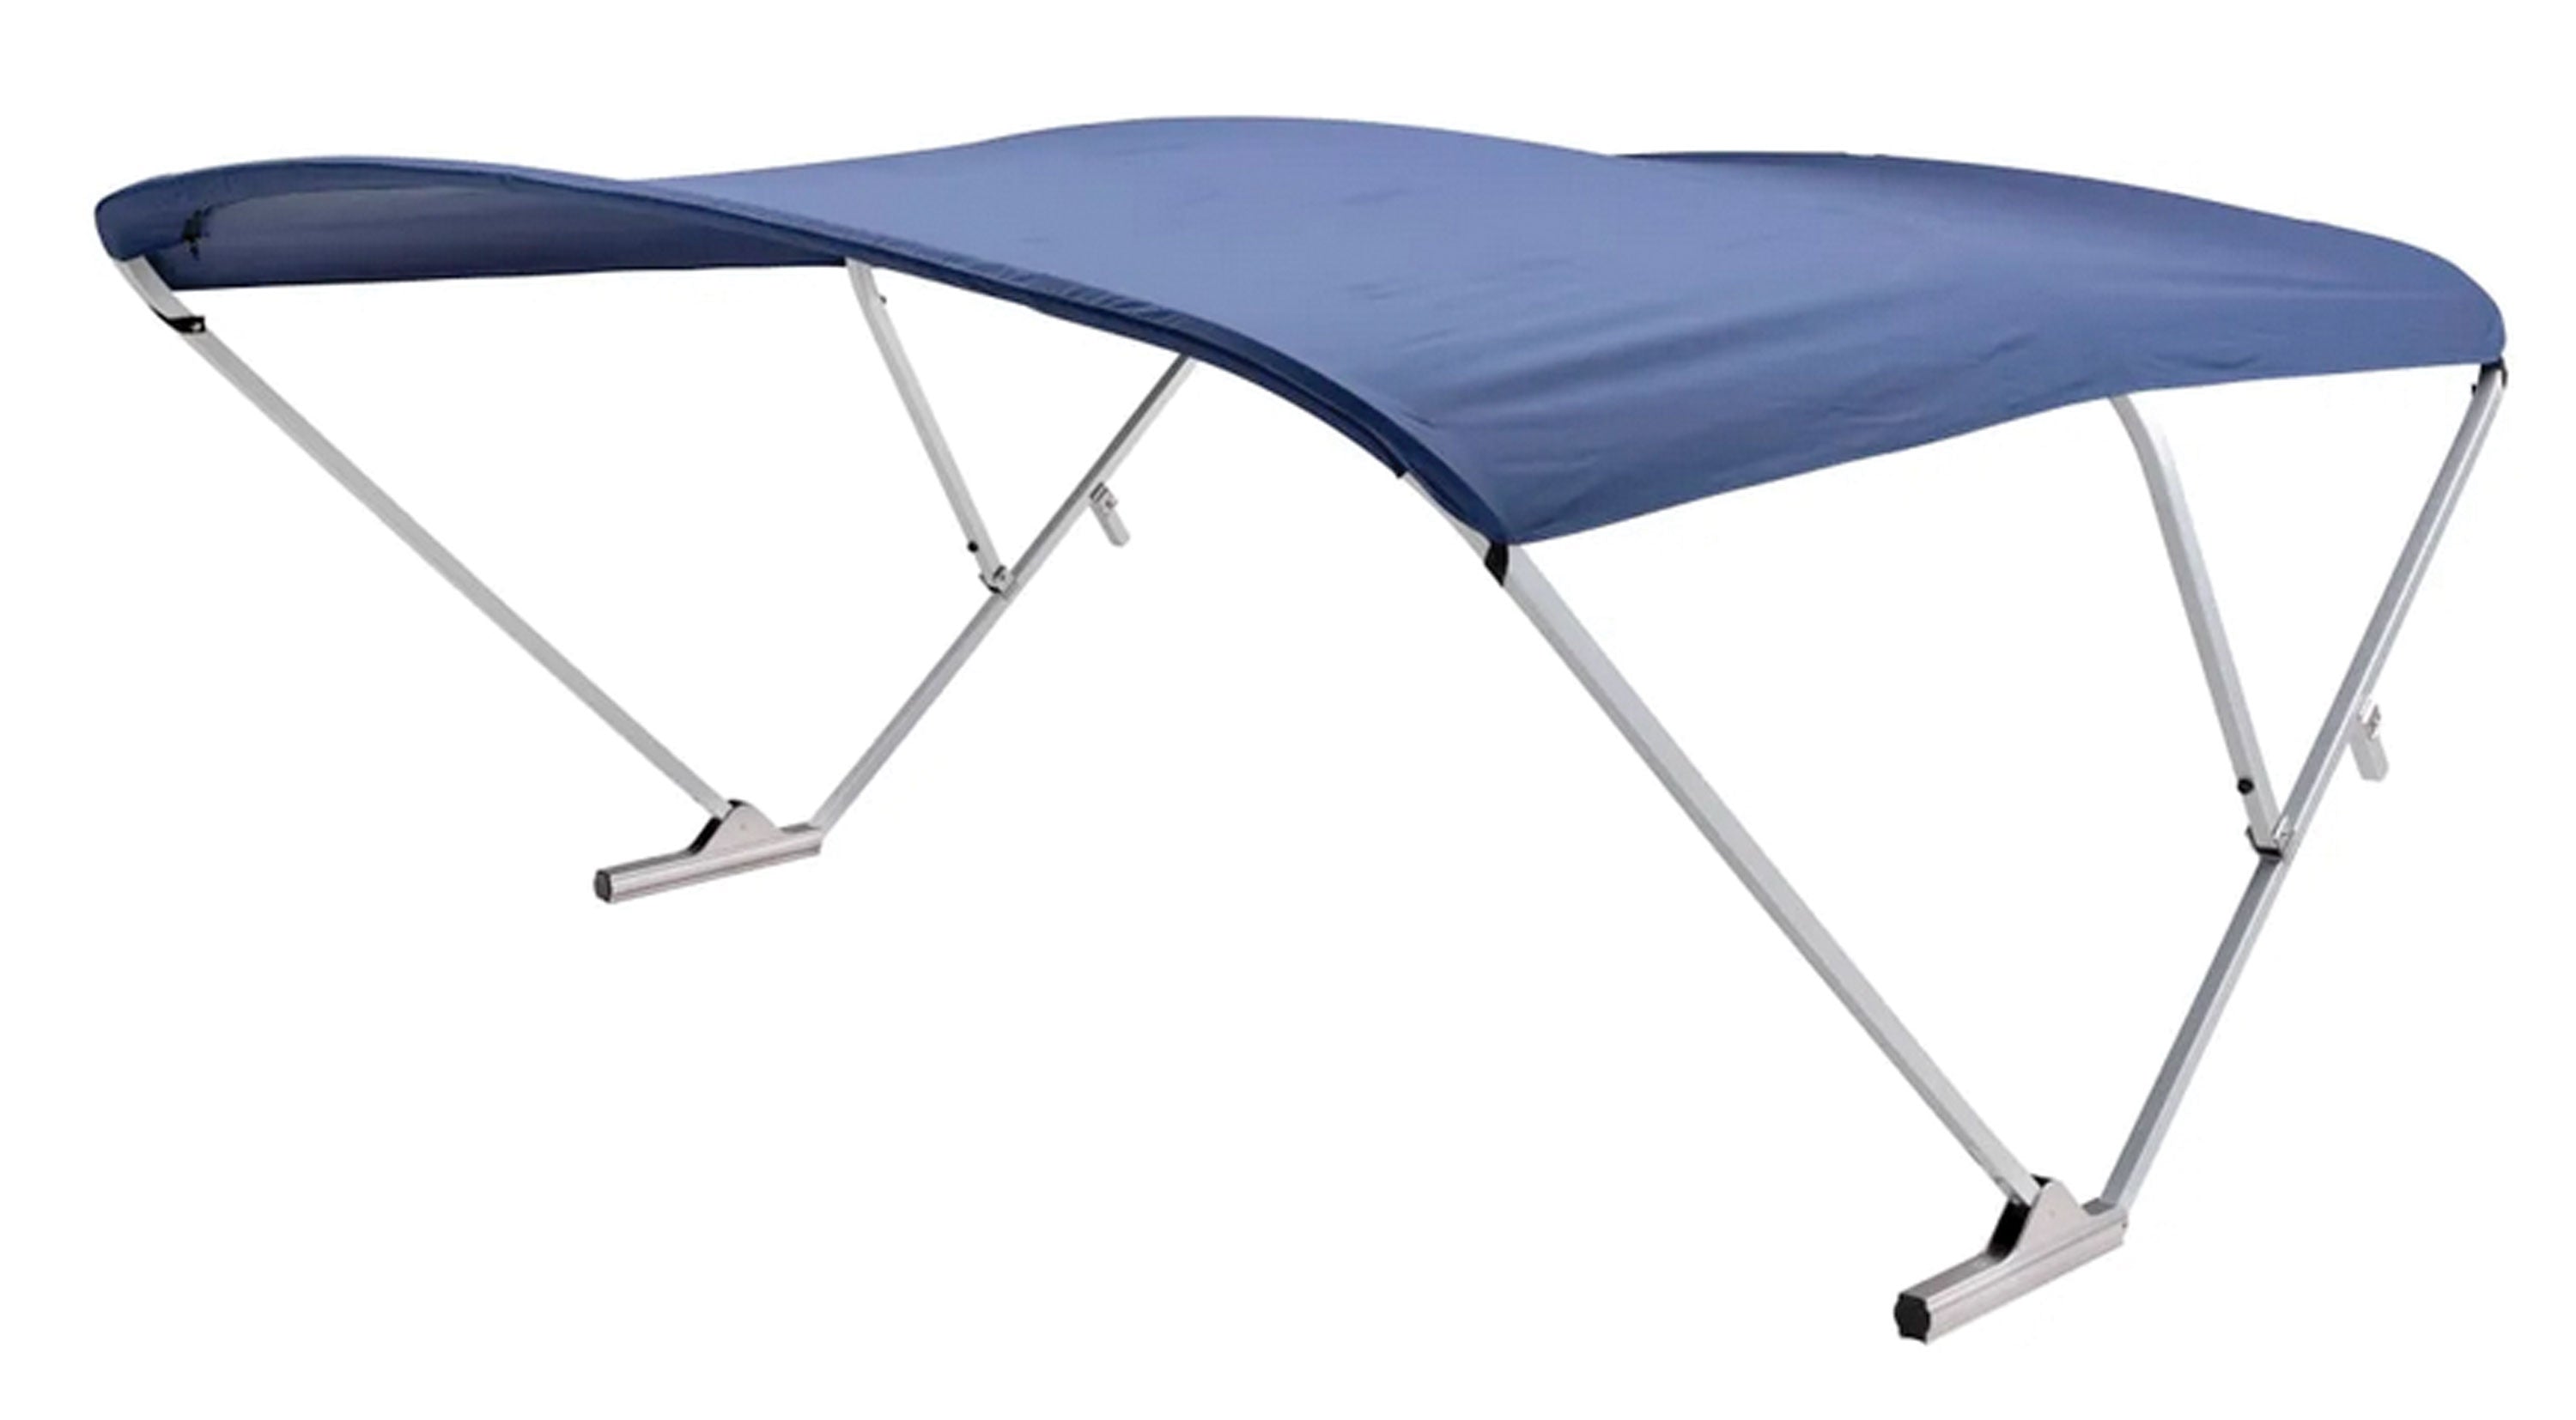 Lippert 2020000301 SureShade Power Bimini - Clear Anodized Frame with Navy Fabric